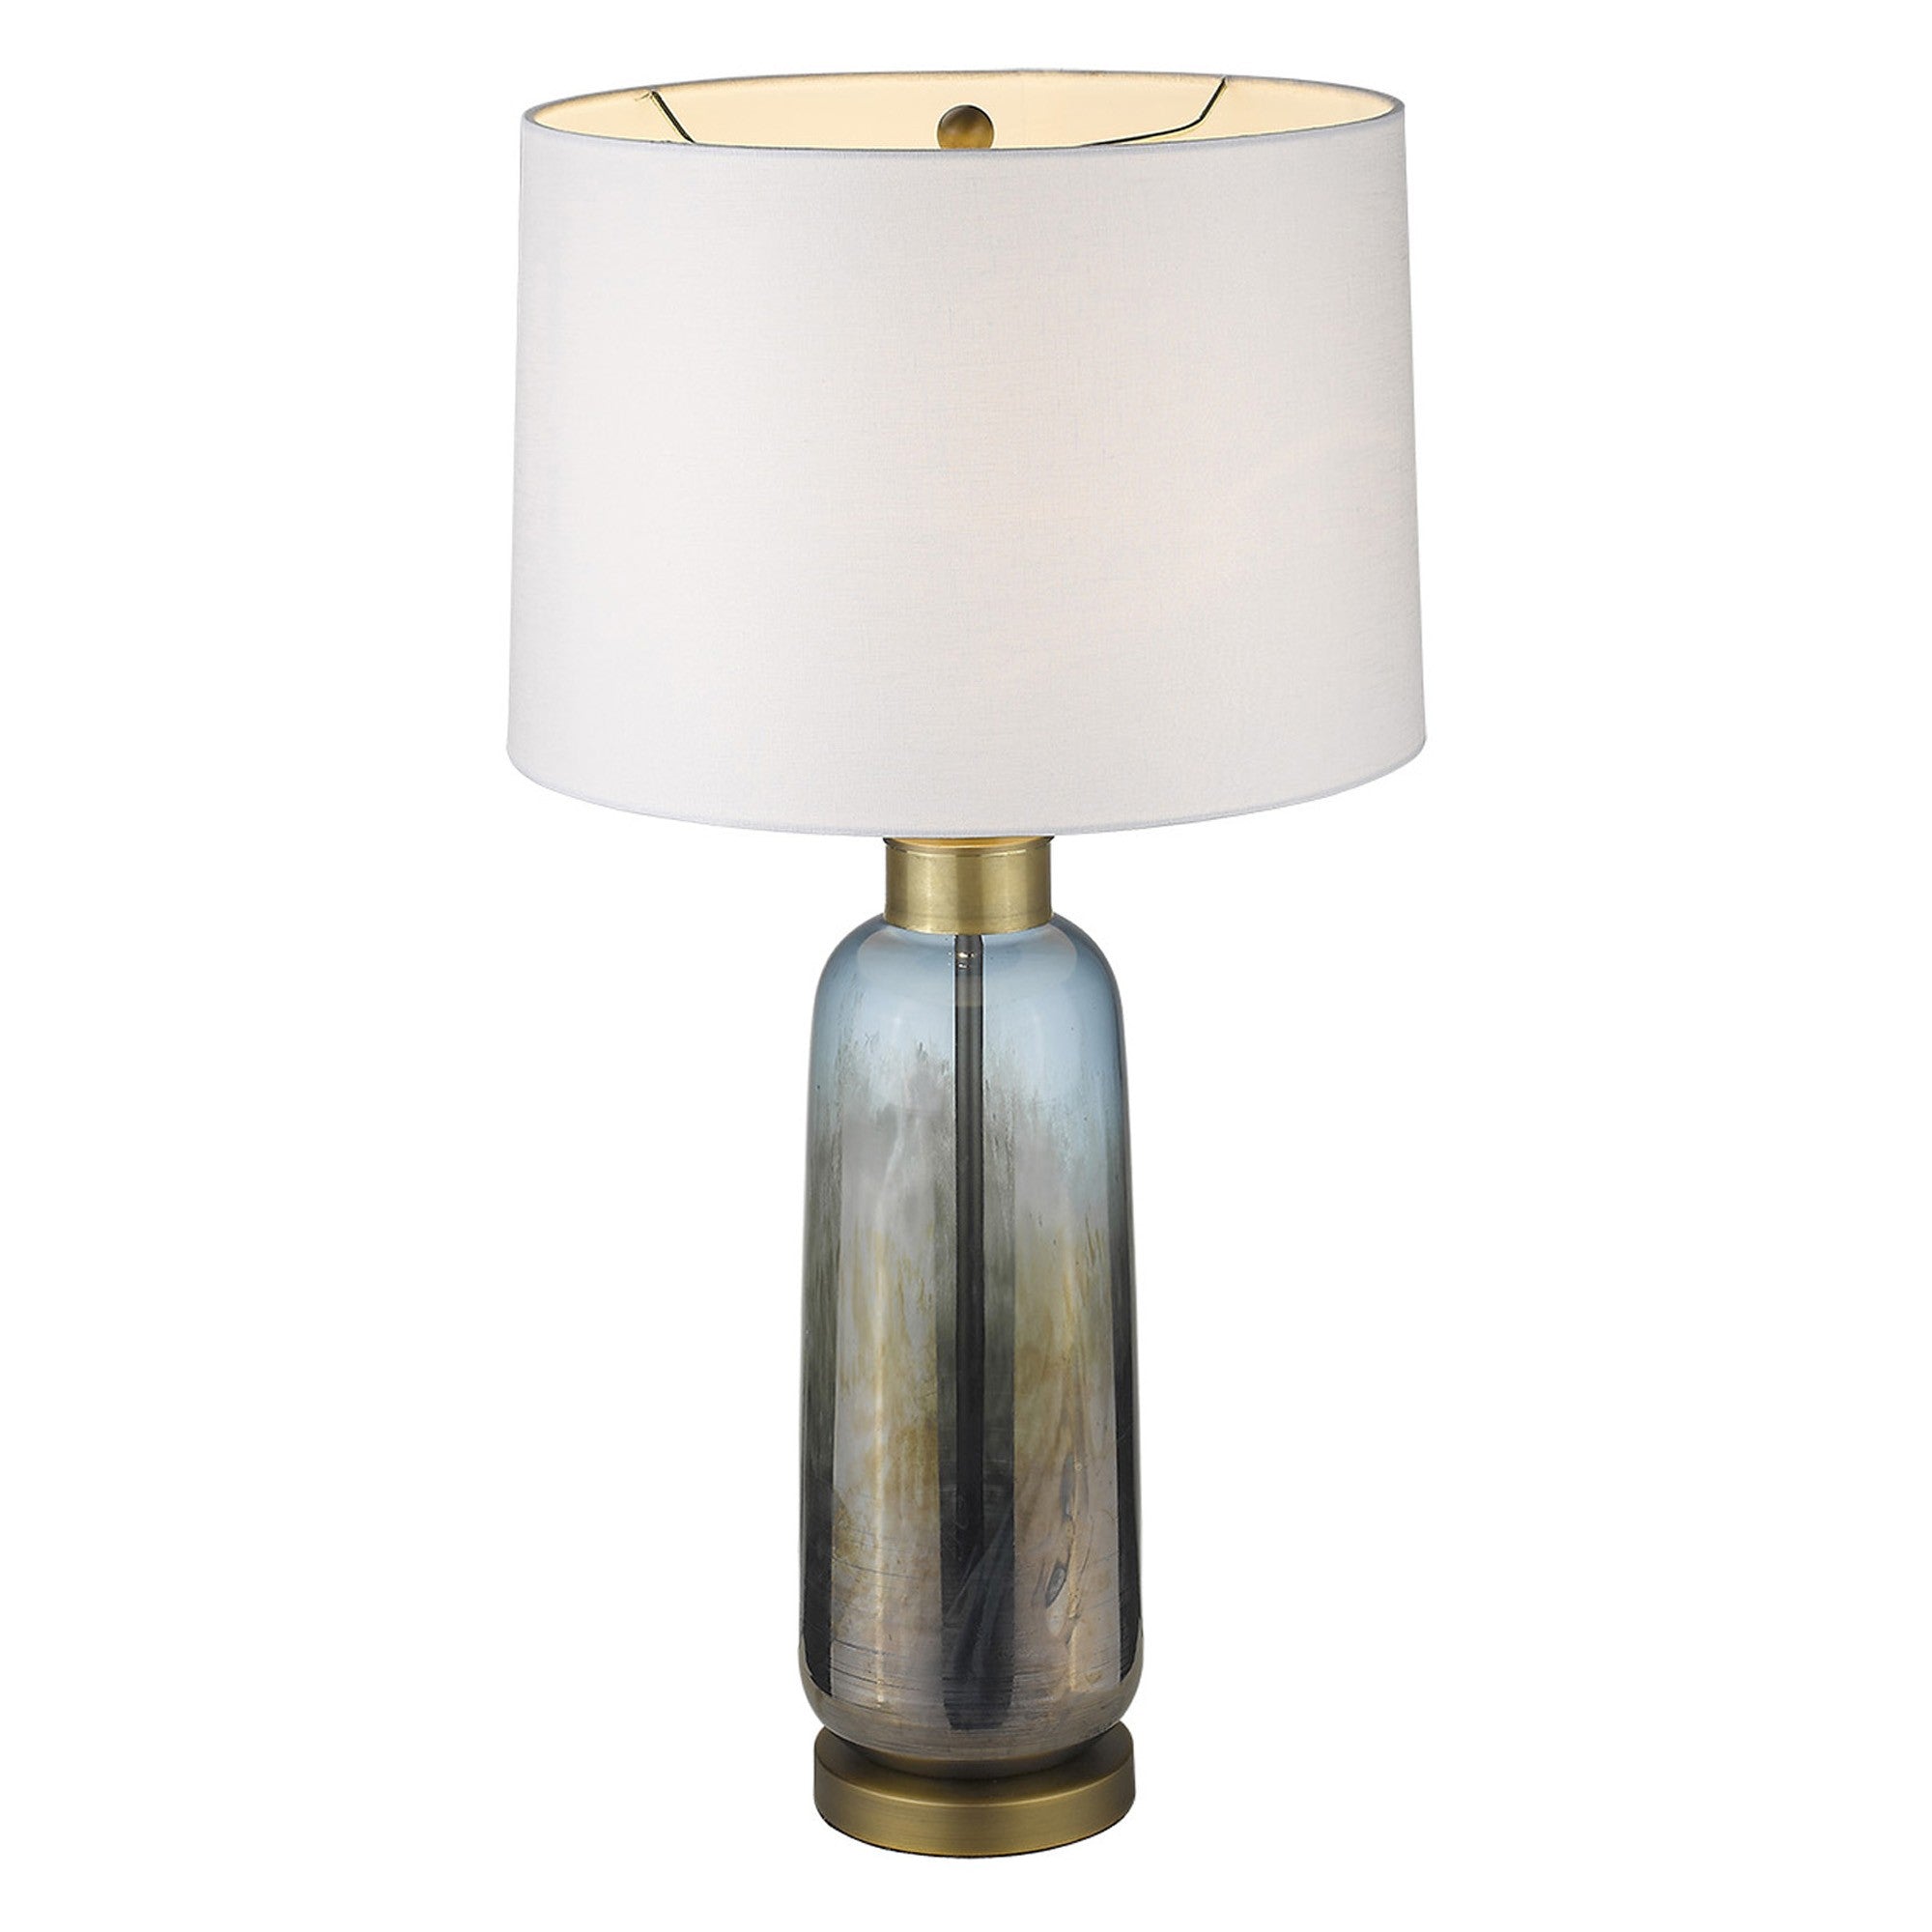 31" Brass Metal Table Lamp With White Empire Shade